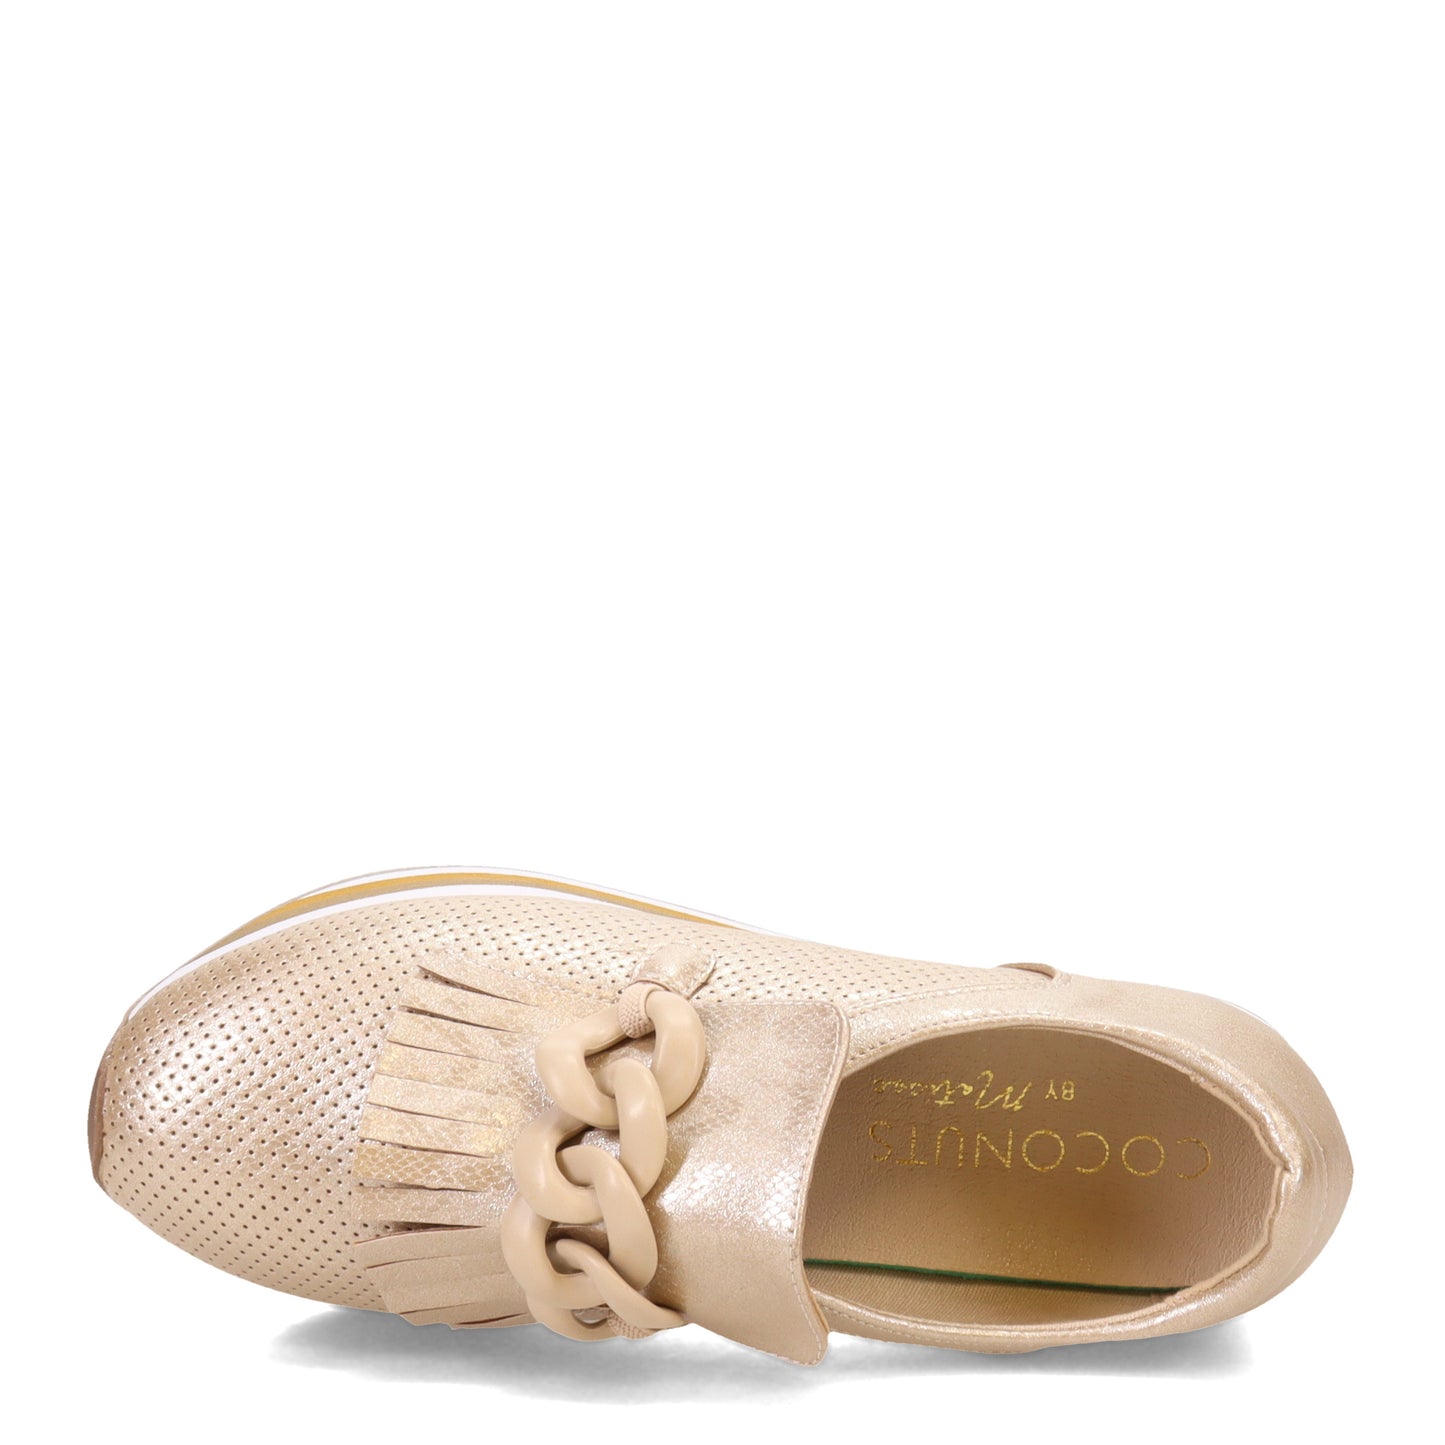 Peltz Shoes  Women's Coconuts by Matisse Bess Loafer Gold BESS-GOLD